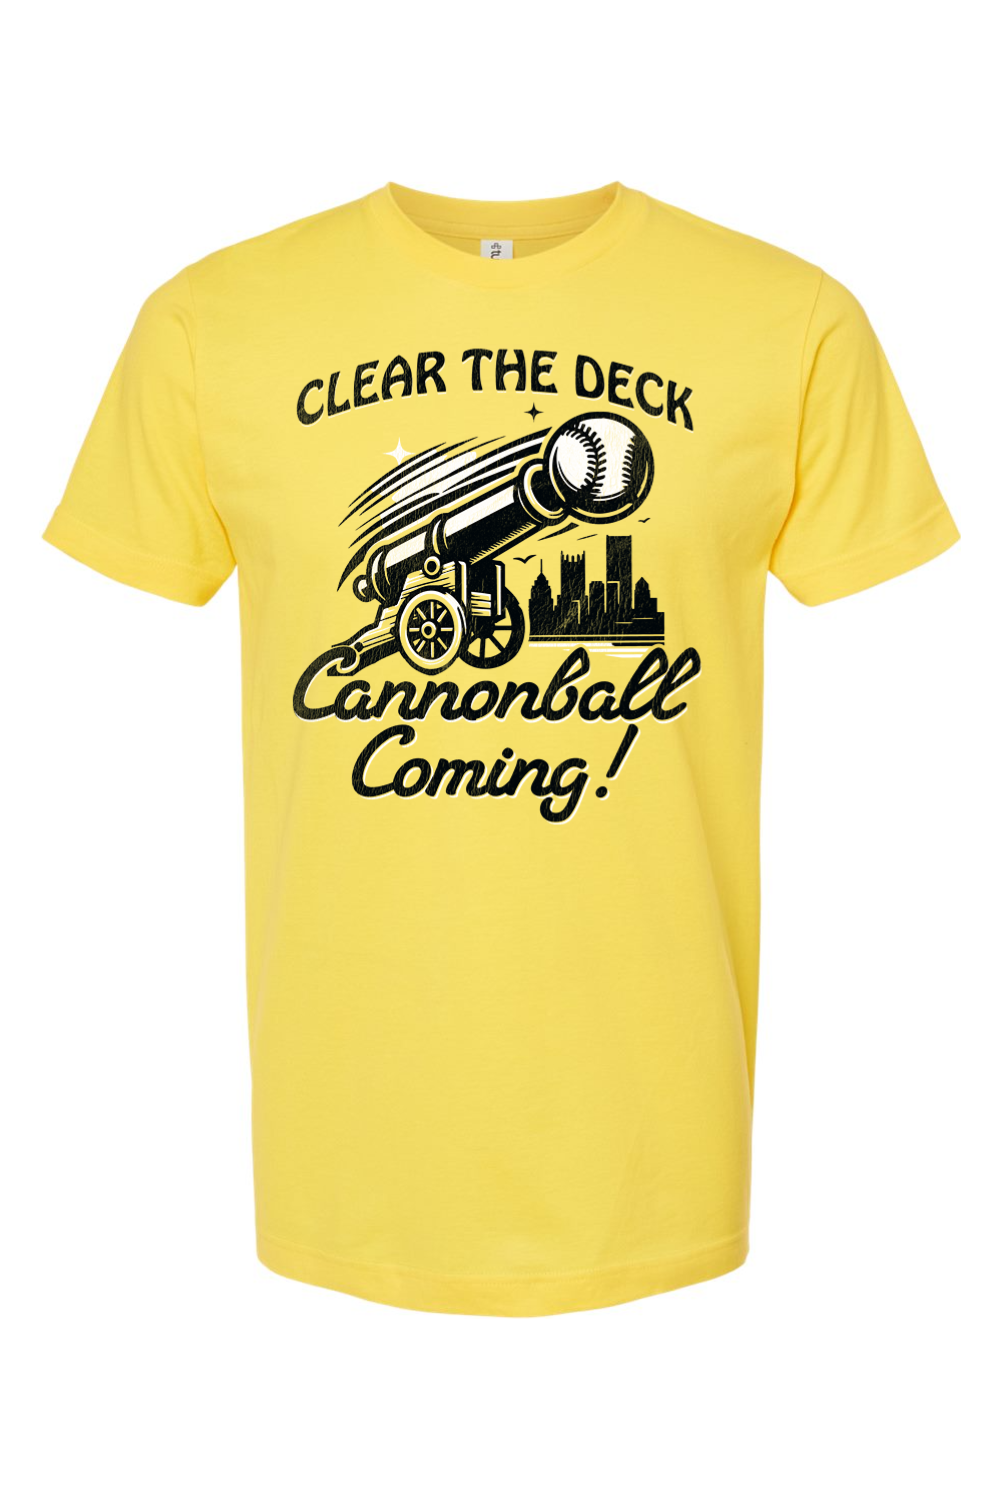 Clear the Deck - Cannonball Coming! - Yinzylvania